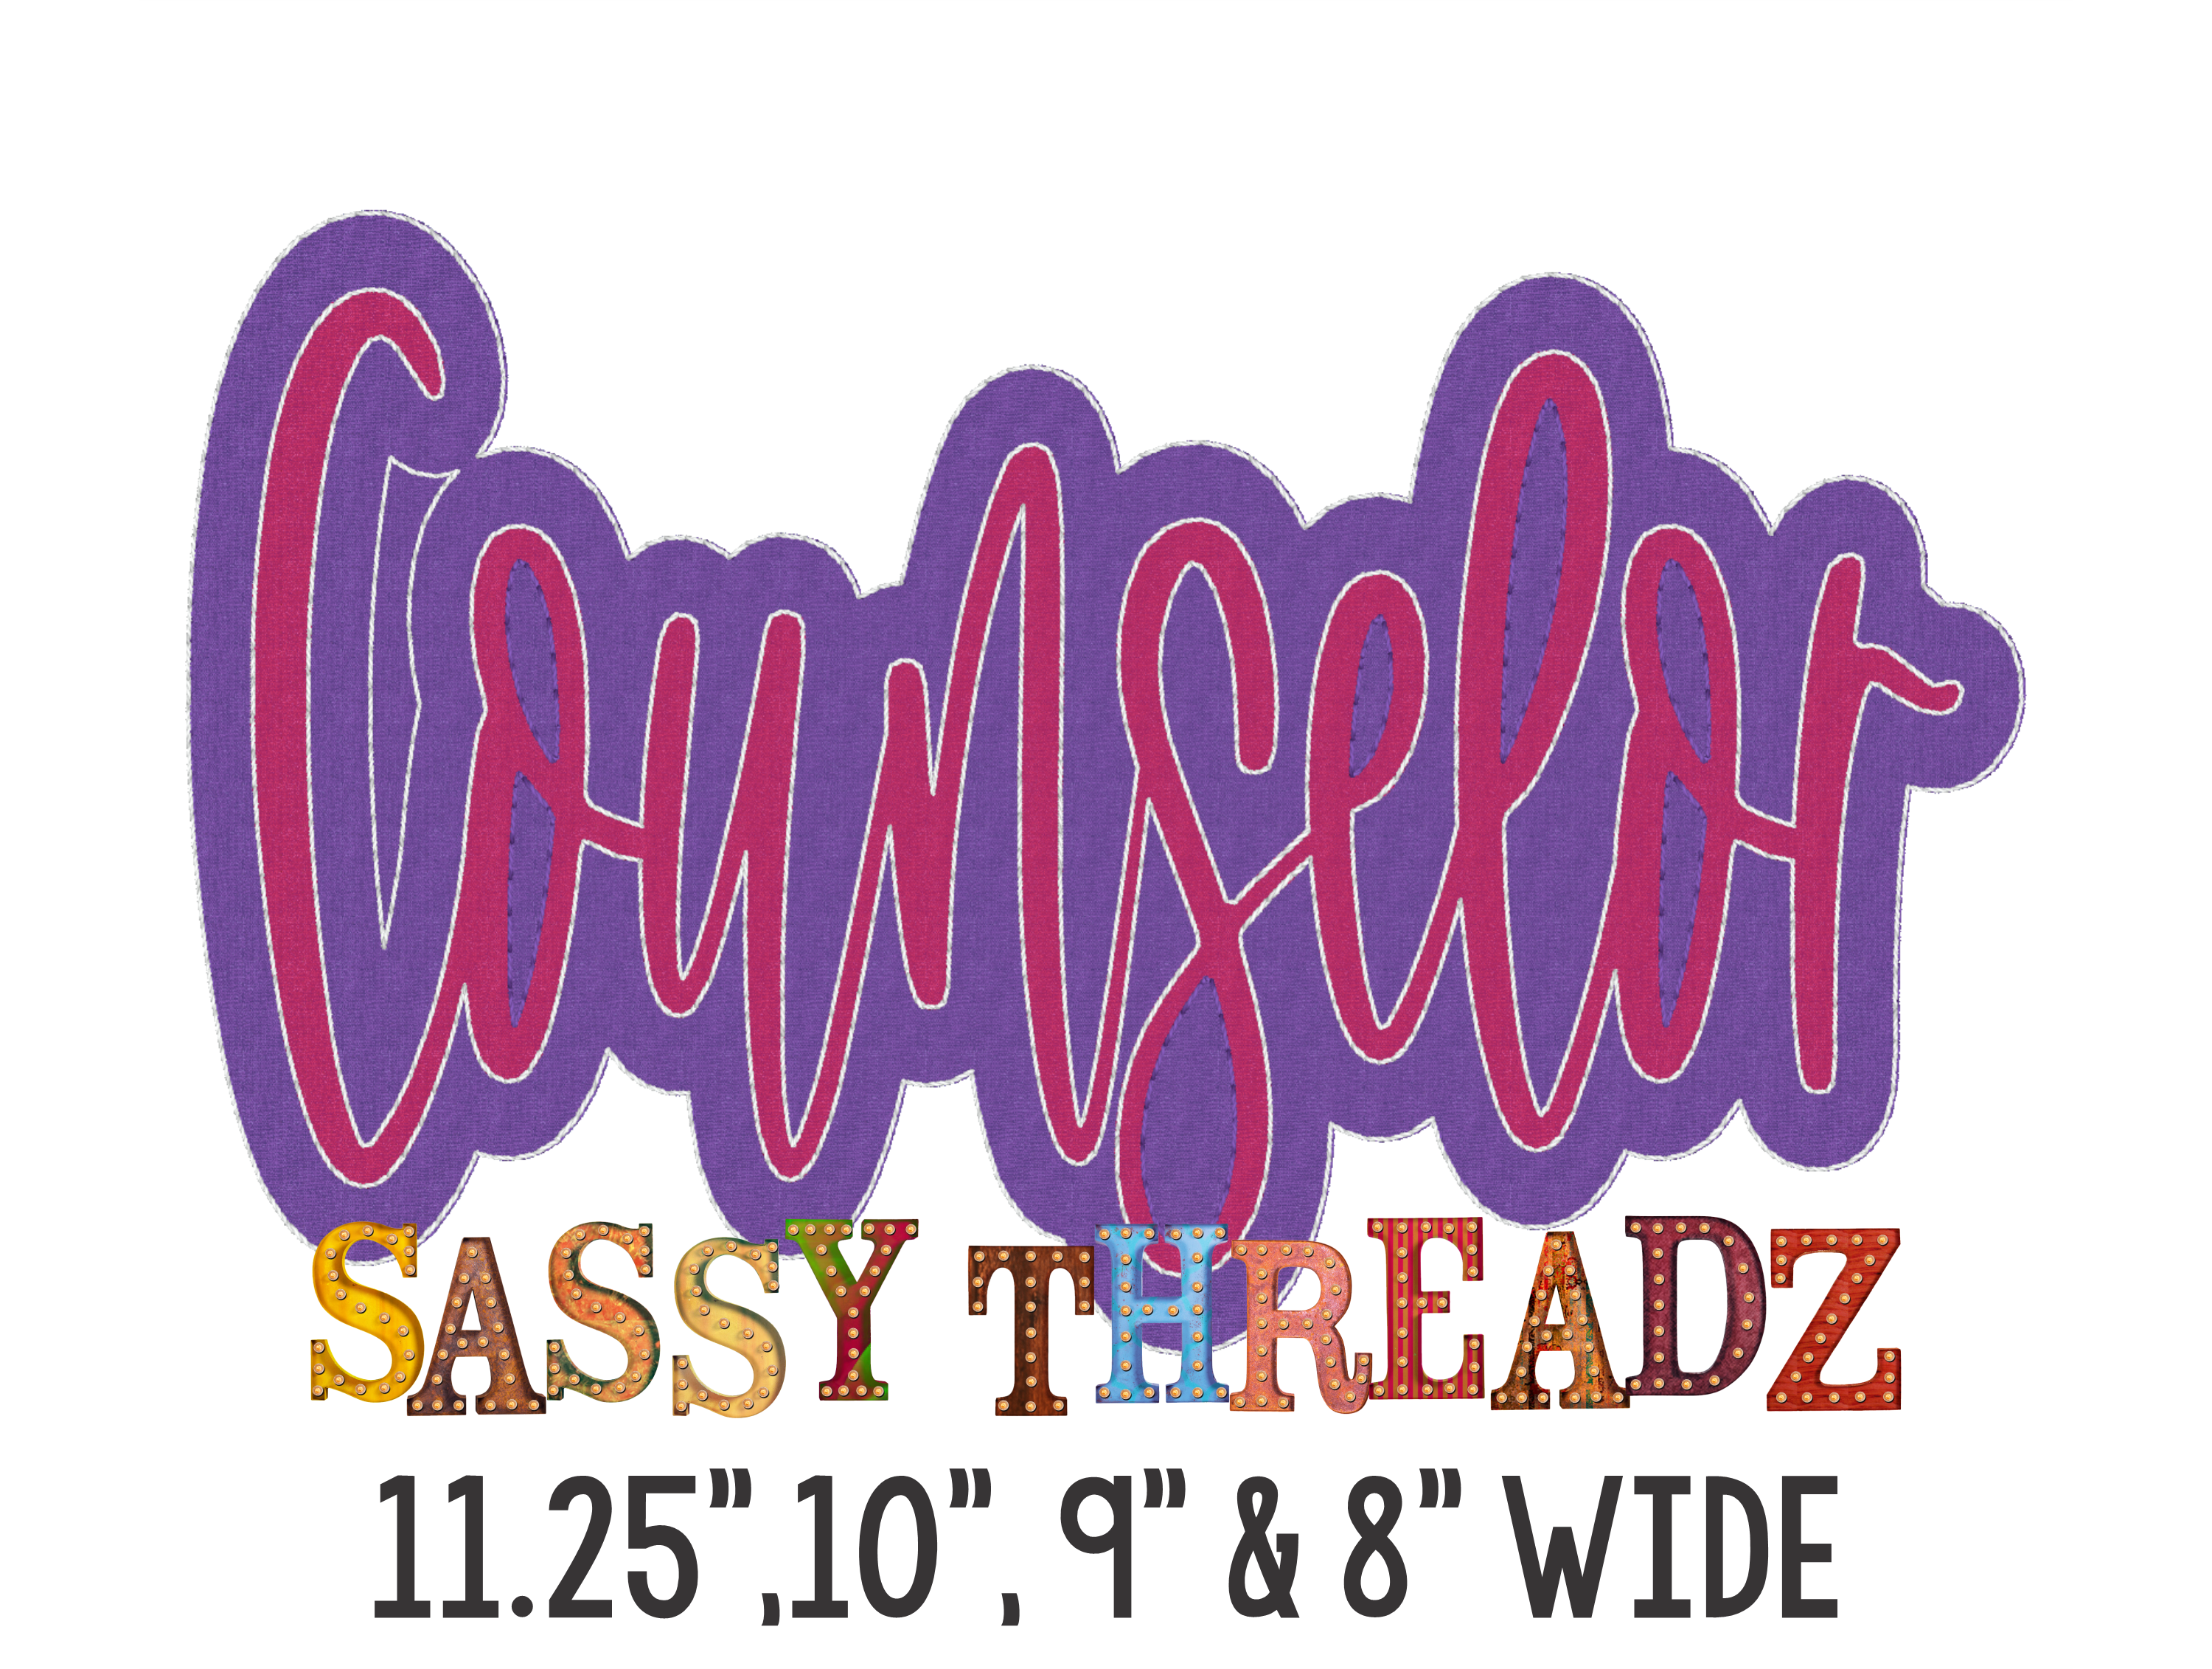 Counselor Double Stacked Script Embroidery Download - Sassy Threadz